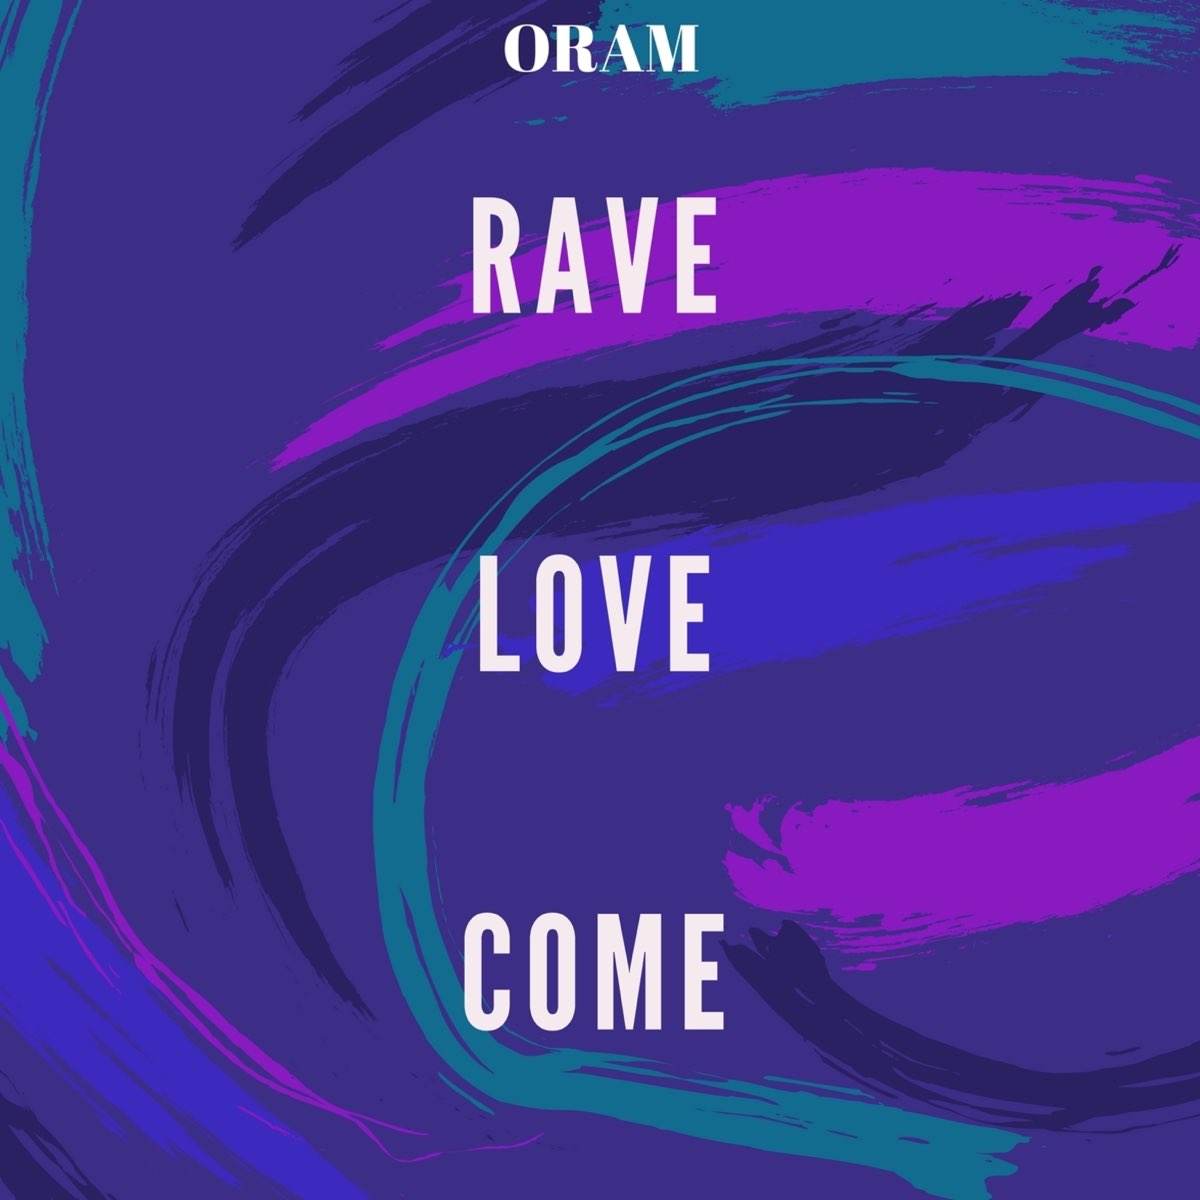 Came single. Love Rave. Love on Rave. The Rave Love Саратов.